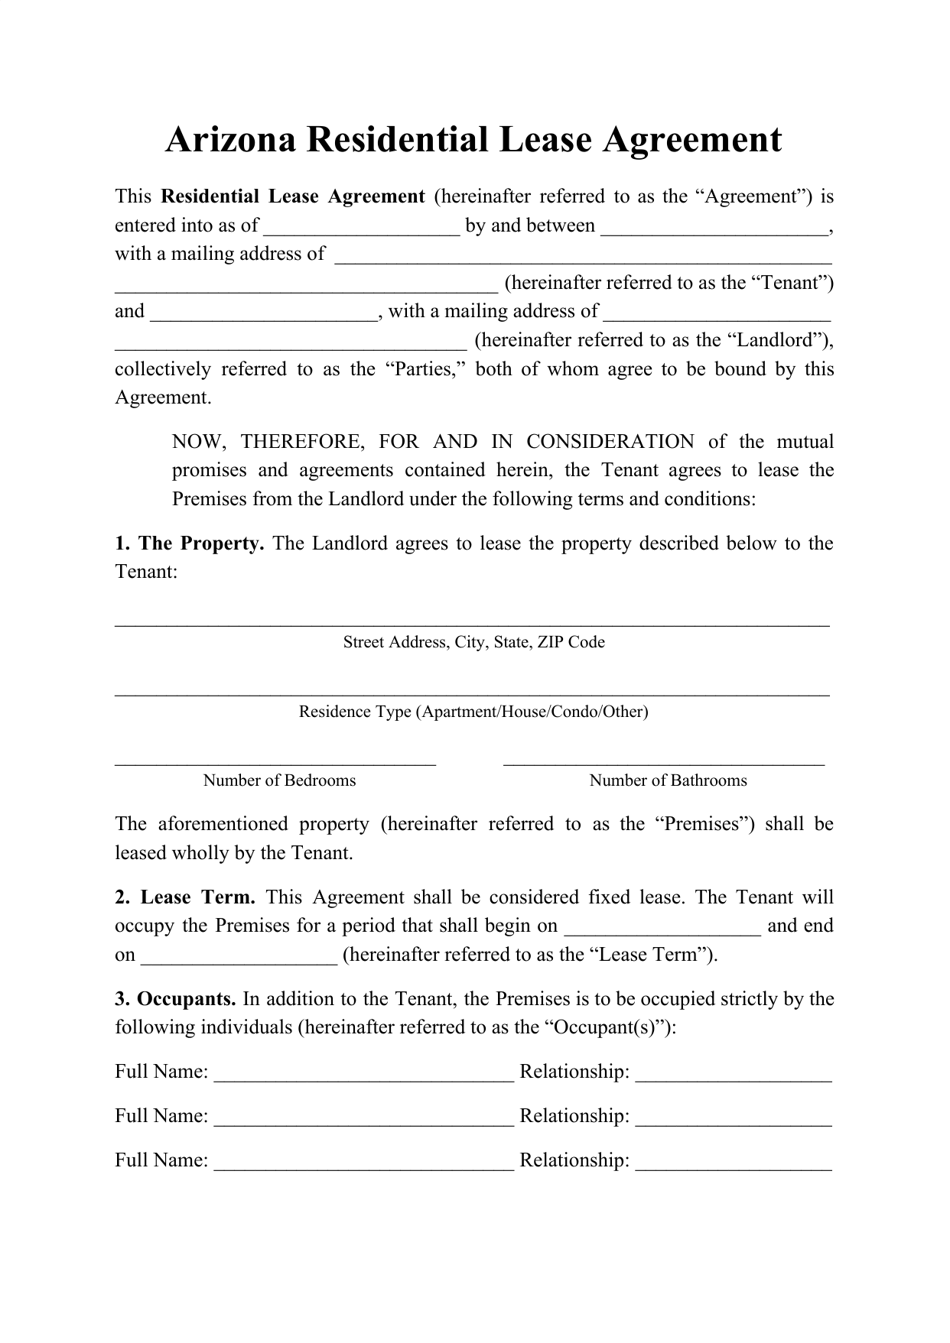 Residential Lease Agreement Template - Arizona, Page 1